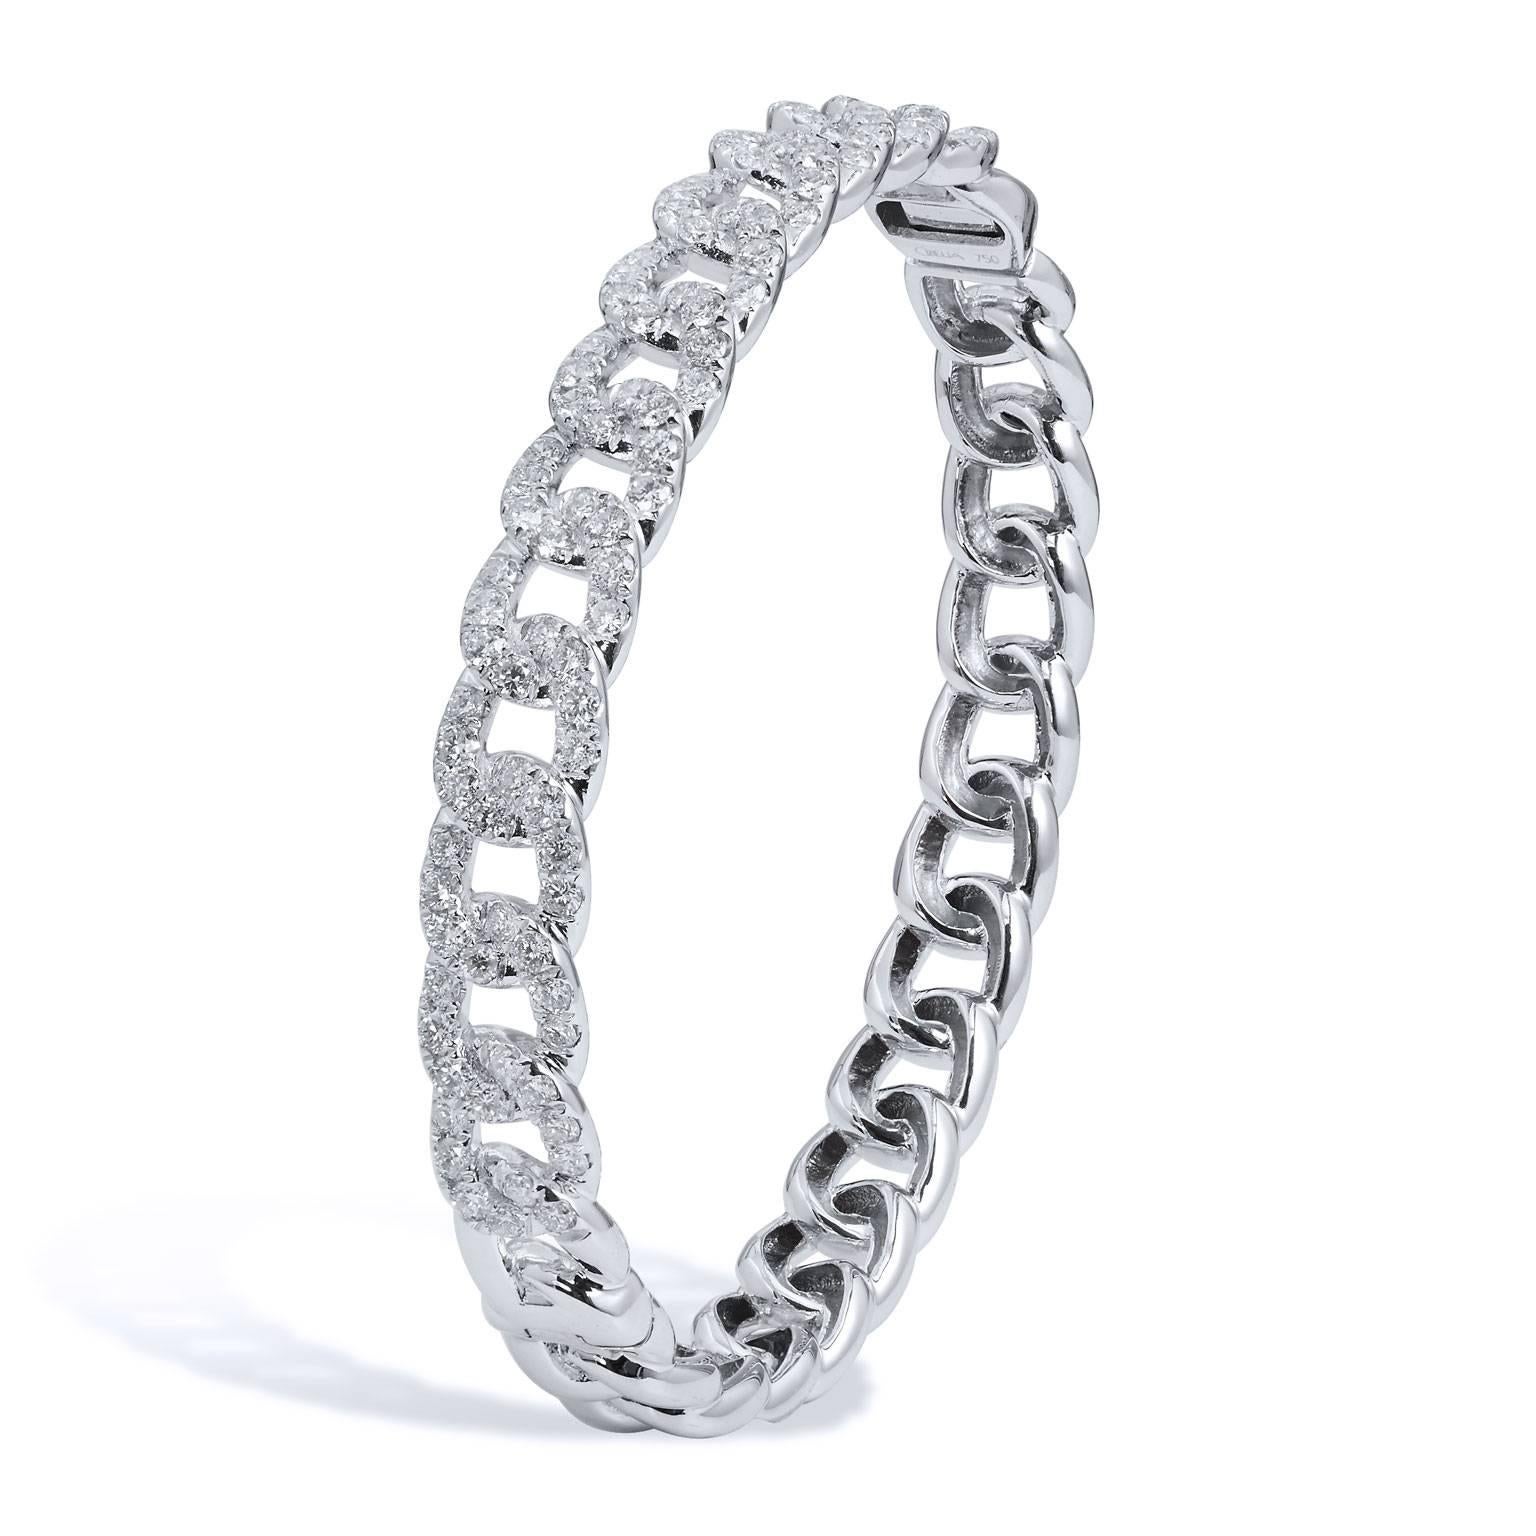 2.79 carat Pave Diamond Chain Link Hinge Lock Bangle Bracelet in 18 karat 

This chain link bangle with hinge lock is fashioned in 18 karat white gold and features 2.79 carat of pave-set diamonds (G/H/VS).